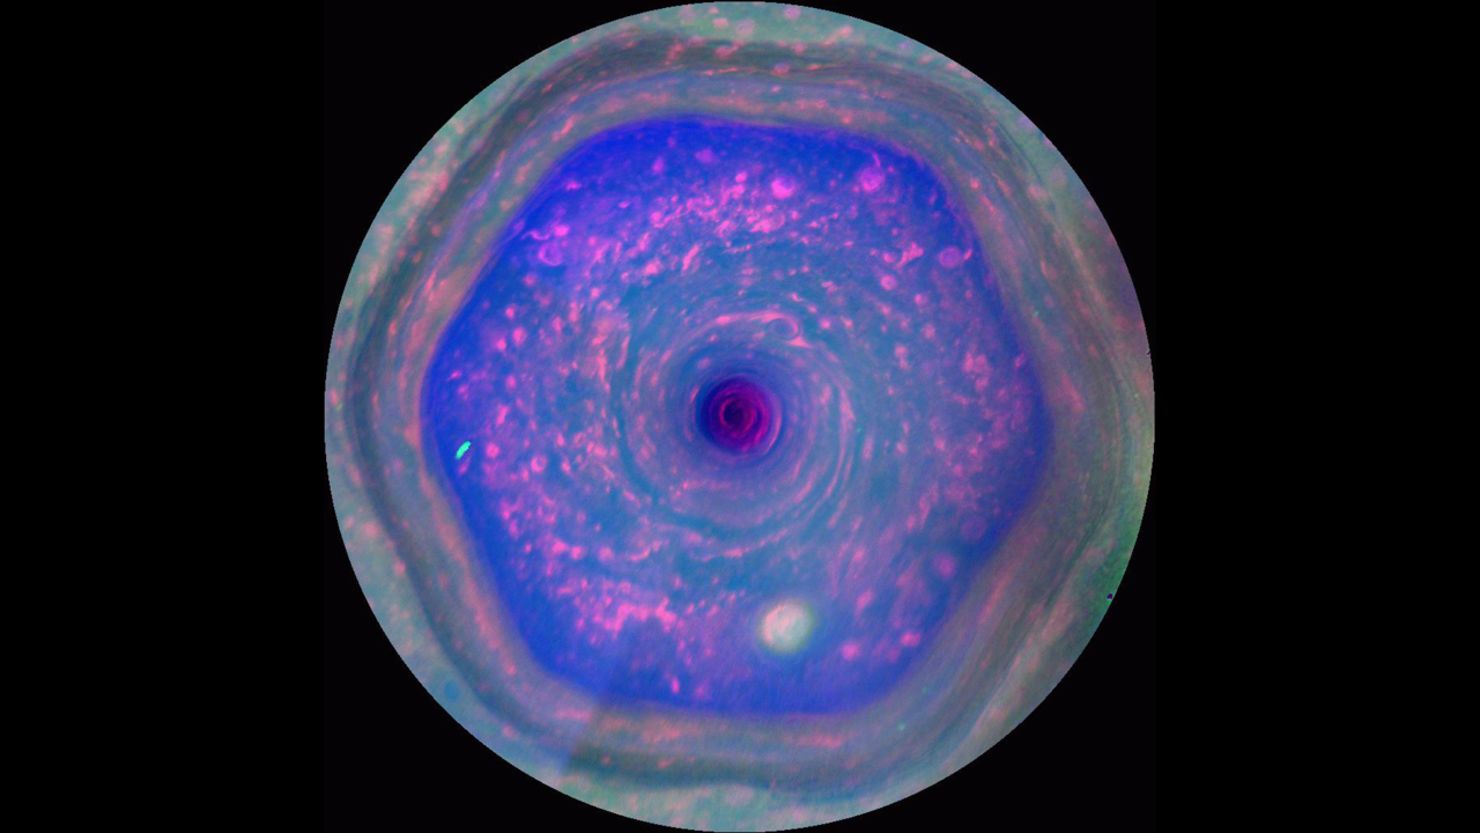 NASA's new images of the "Hexagon" feature are the first  to show a complete view of Saturn's north pole.